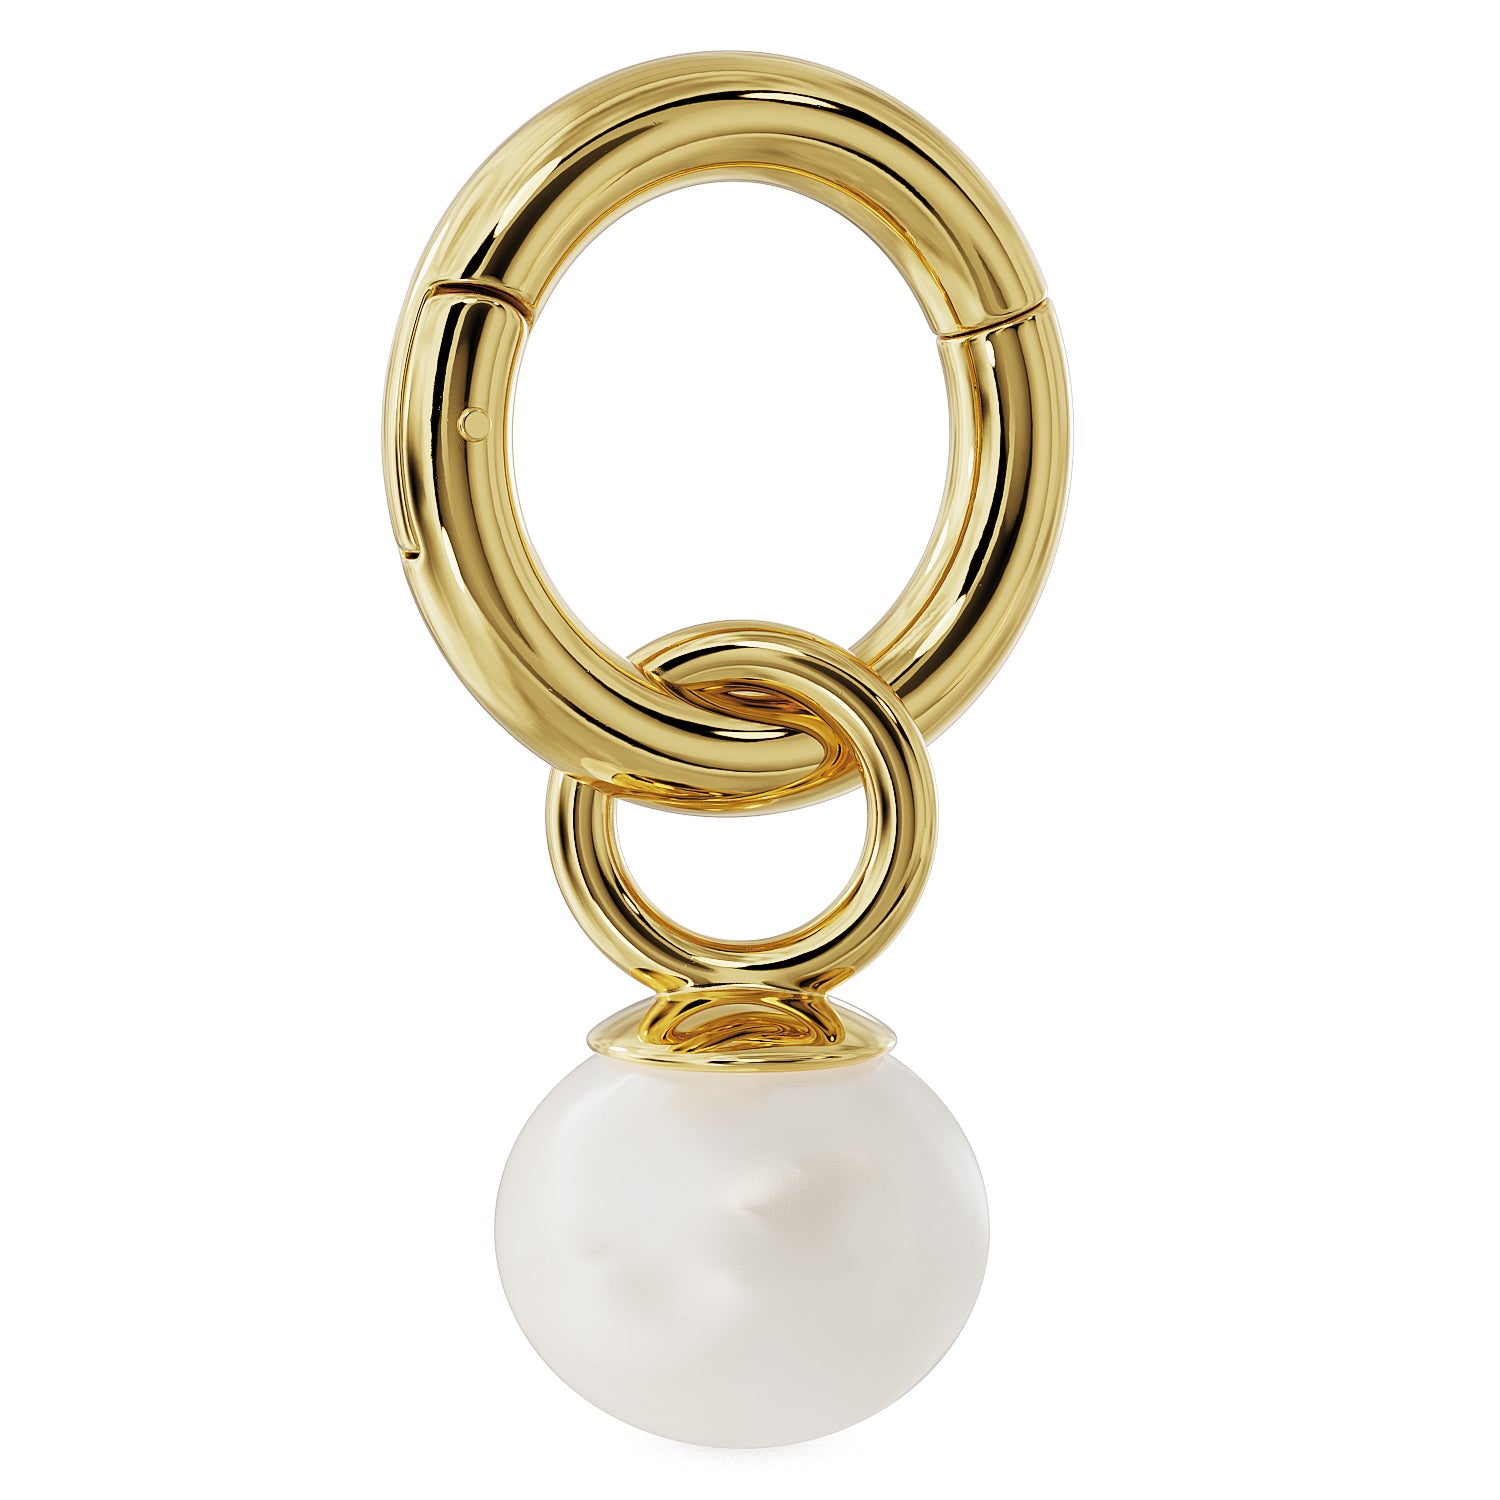 Cultured Freshwater Pearl Charm Accessory for Piercing Jewelry